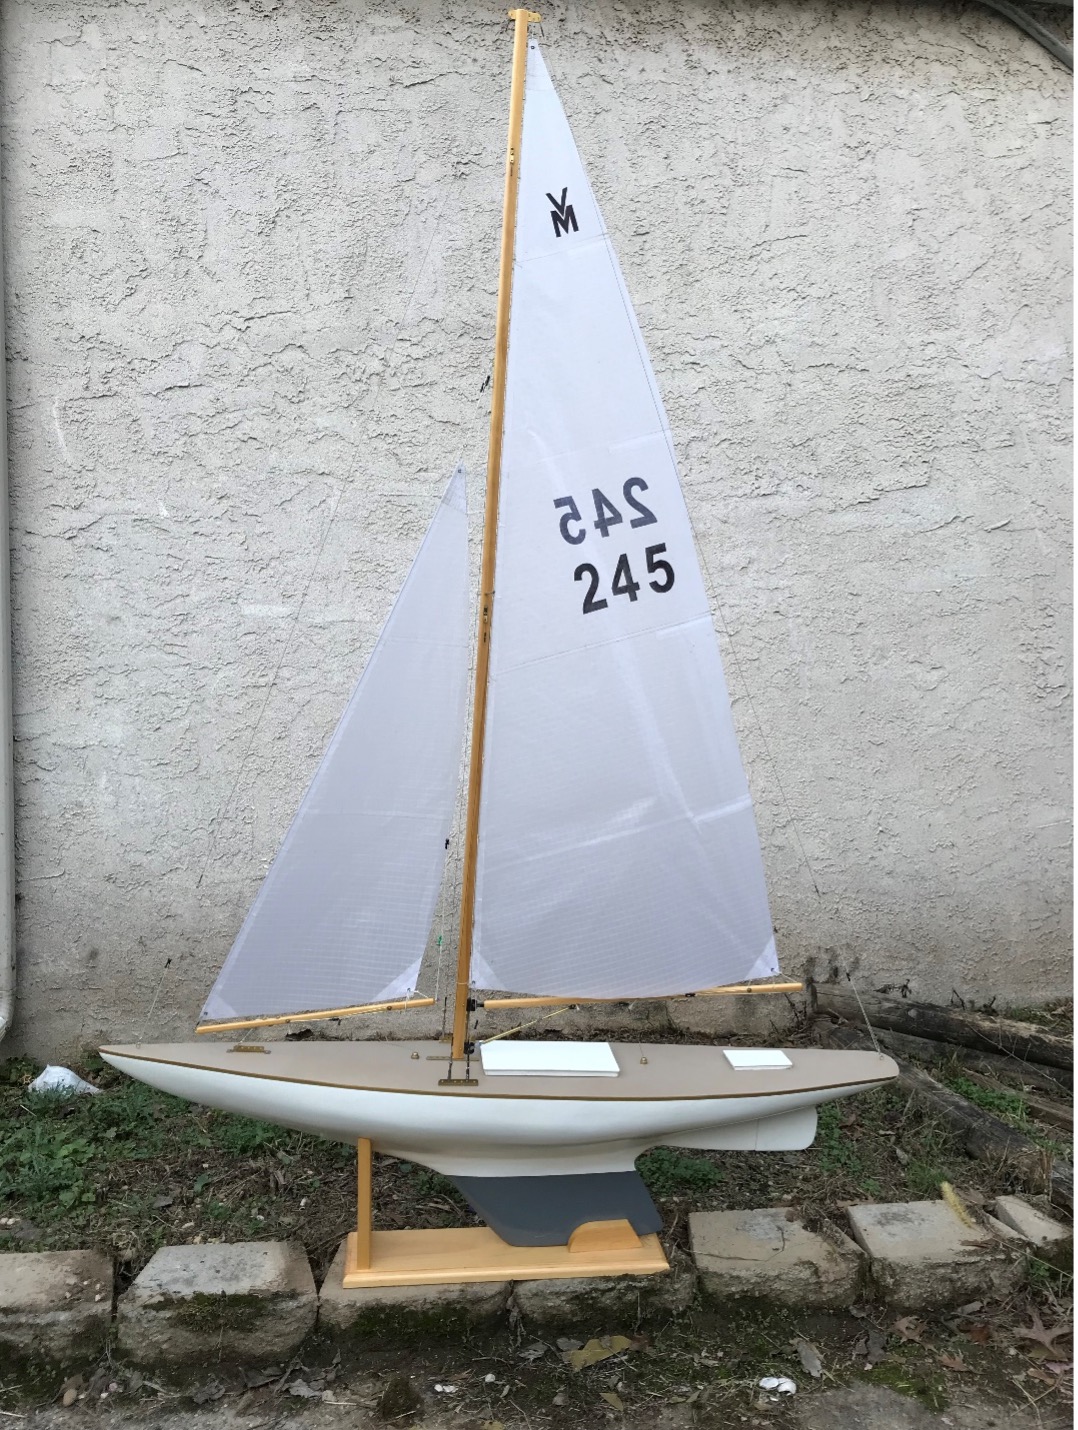 vintage marblehead model yacht for sale